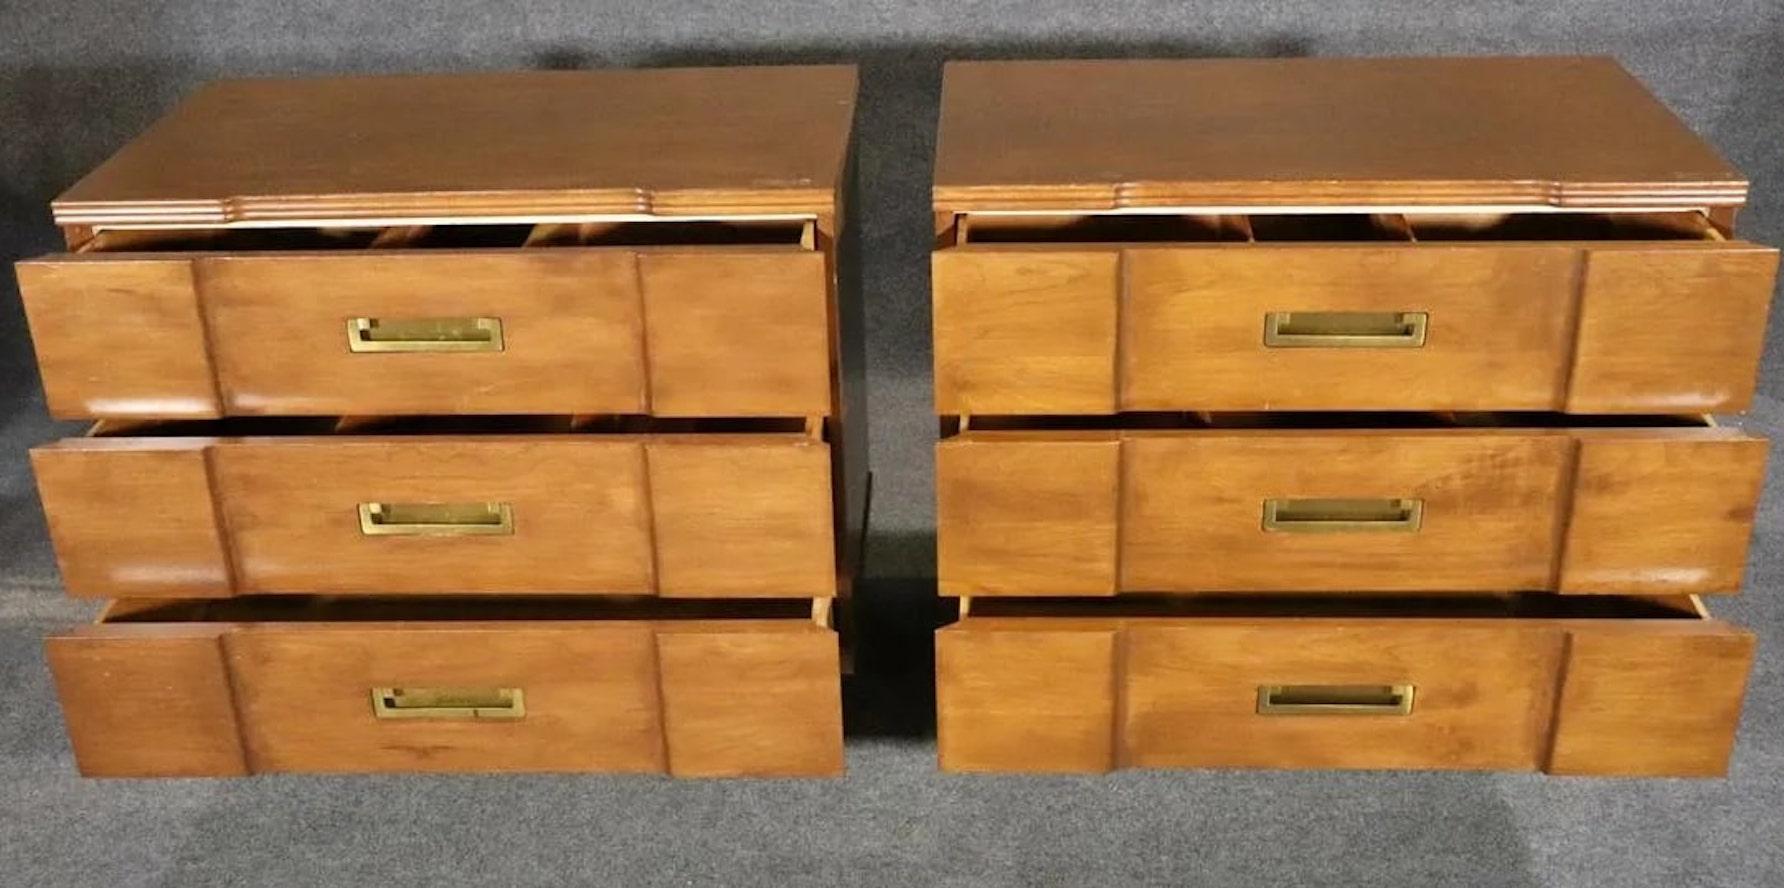 Pair of midcentury chests by John Widdicomb Company. Polished brass hardware compliments the fruitwood drawers.
Please confirm location NY or NJ.